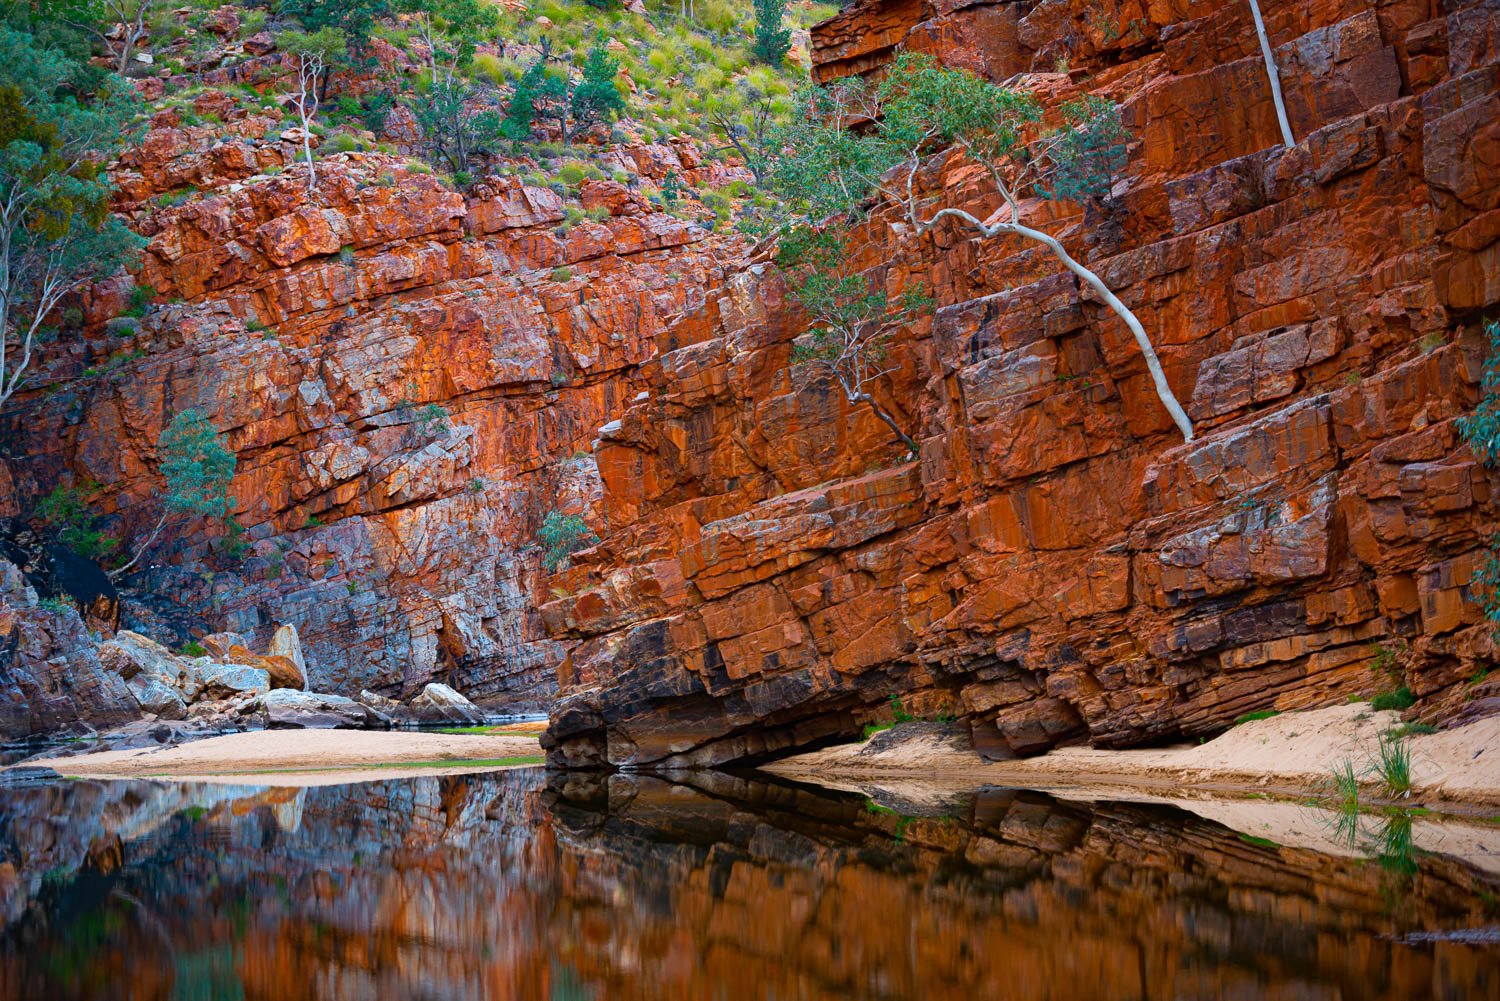 A morning view of mountain walls with a watercourse with clear reflections, Lone Tree, Ormiston Gorge - Red Centre NT